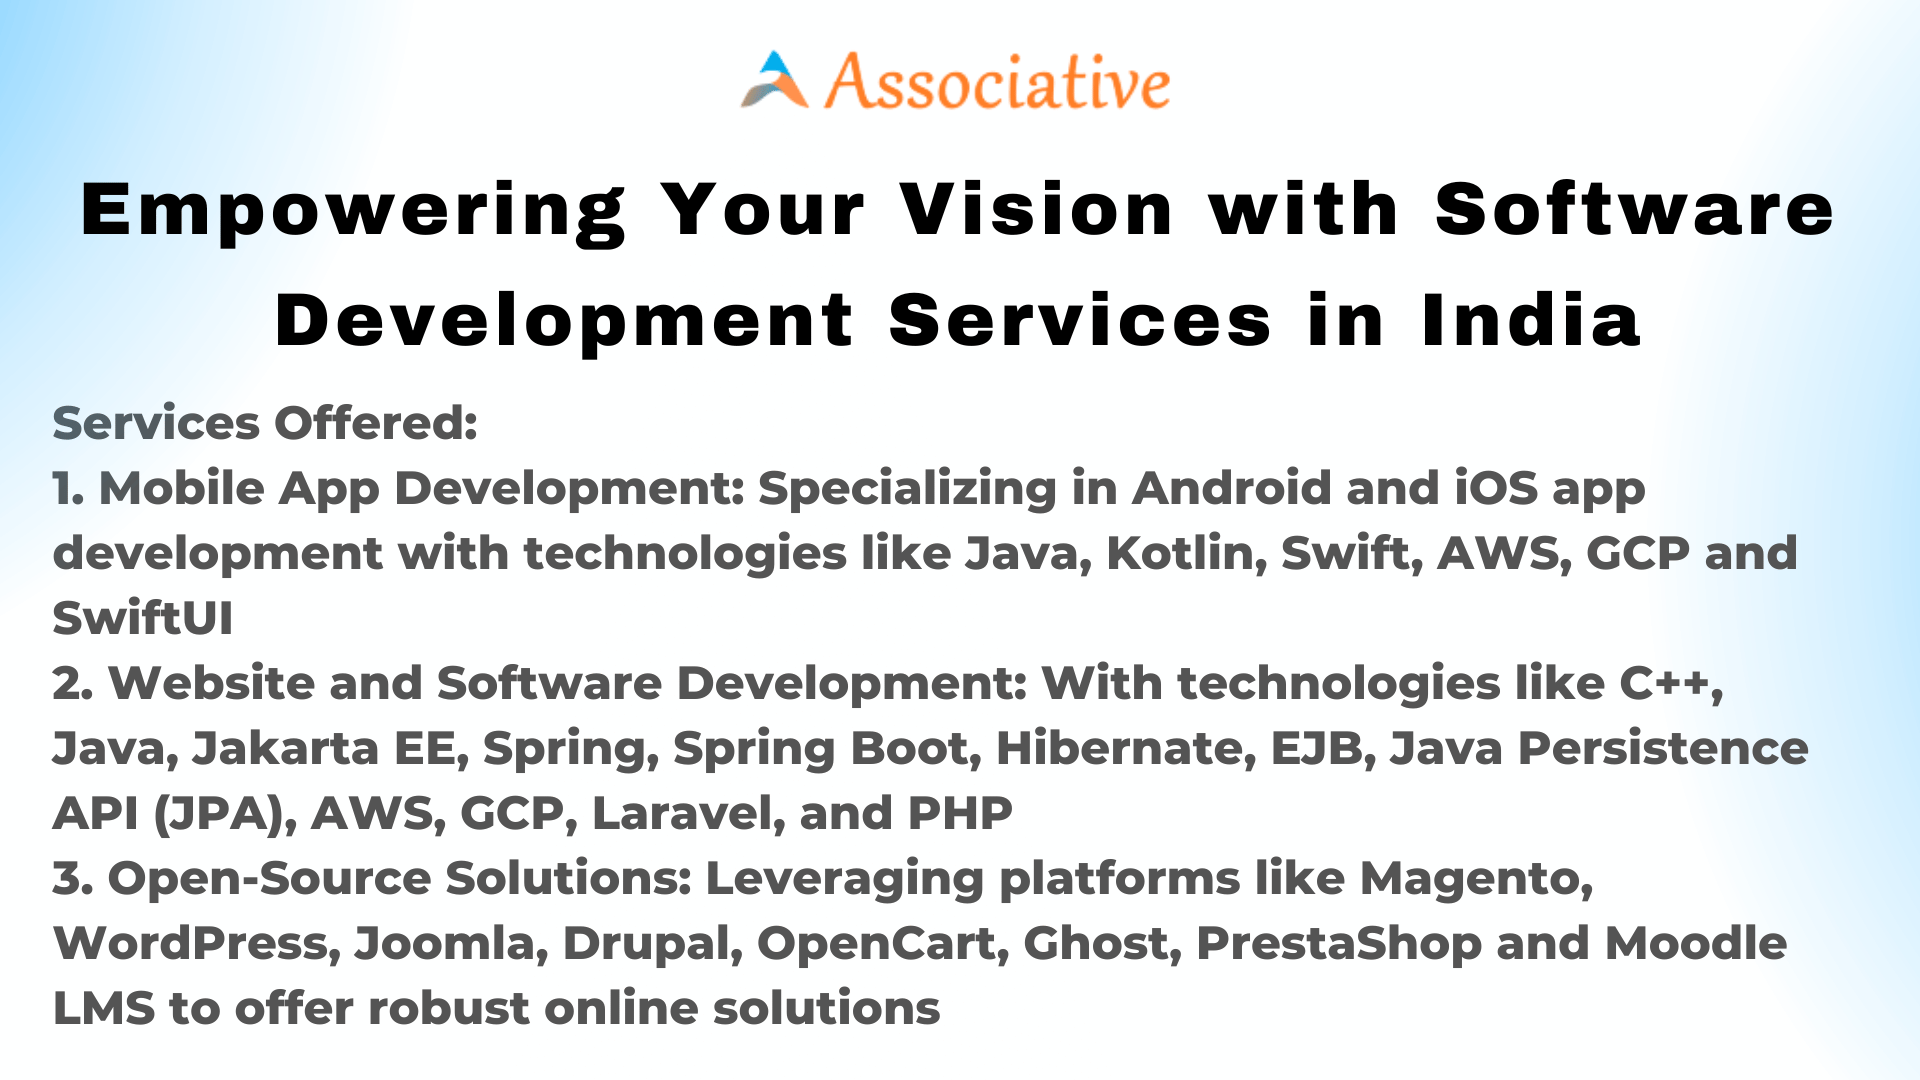 Empowering Your Vision with Software Development Services in India